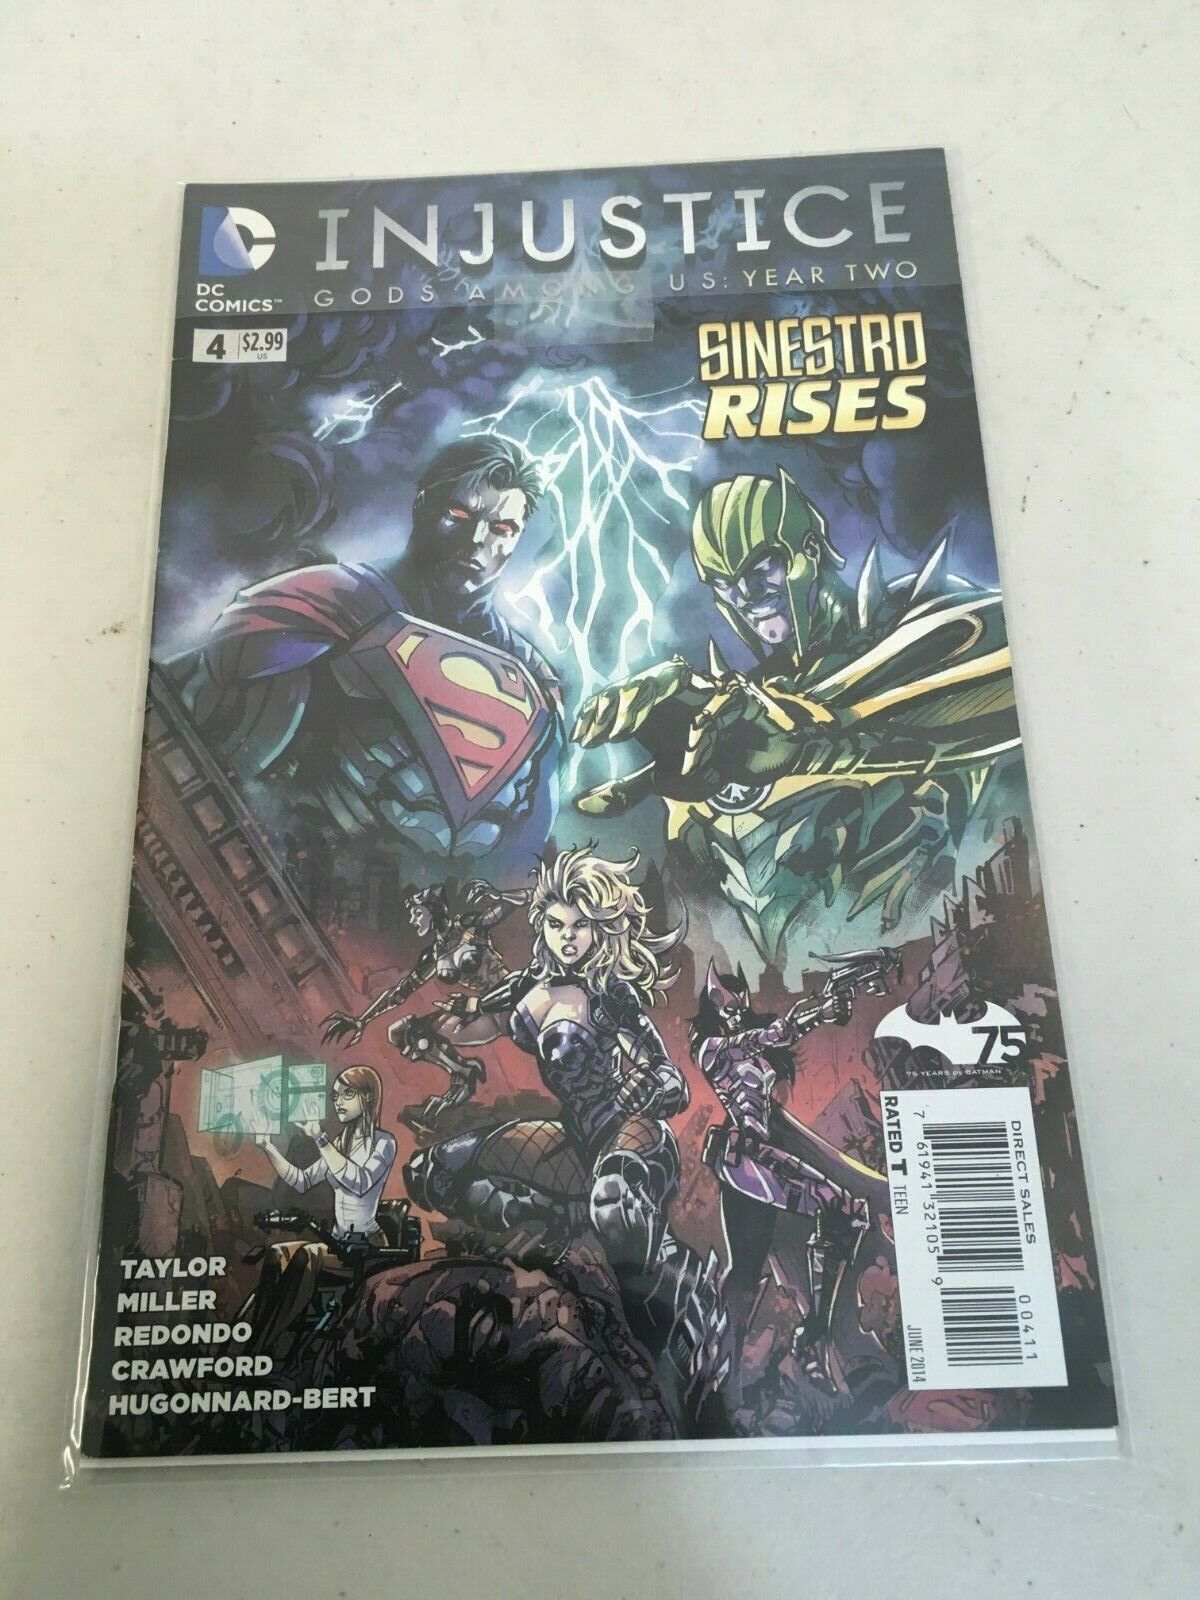 Injustice Gods Among Us Year Two #4